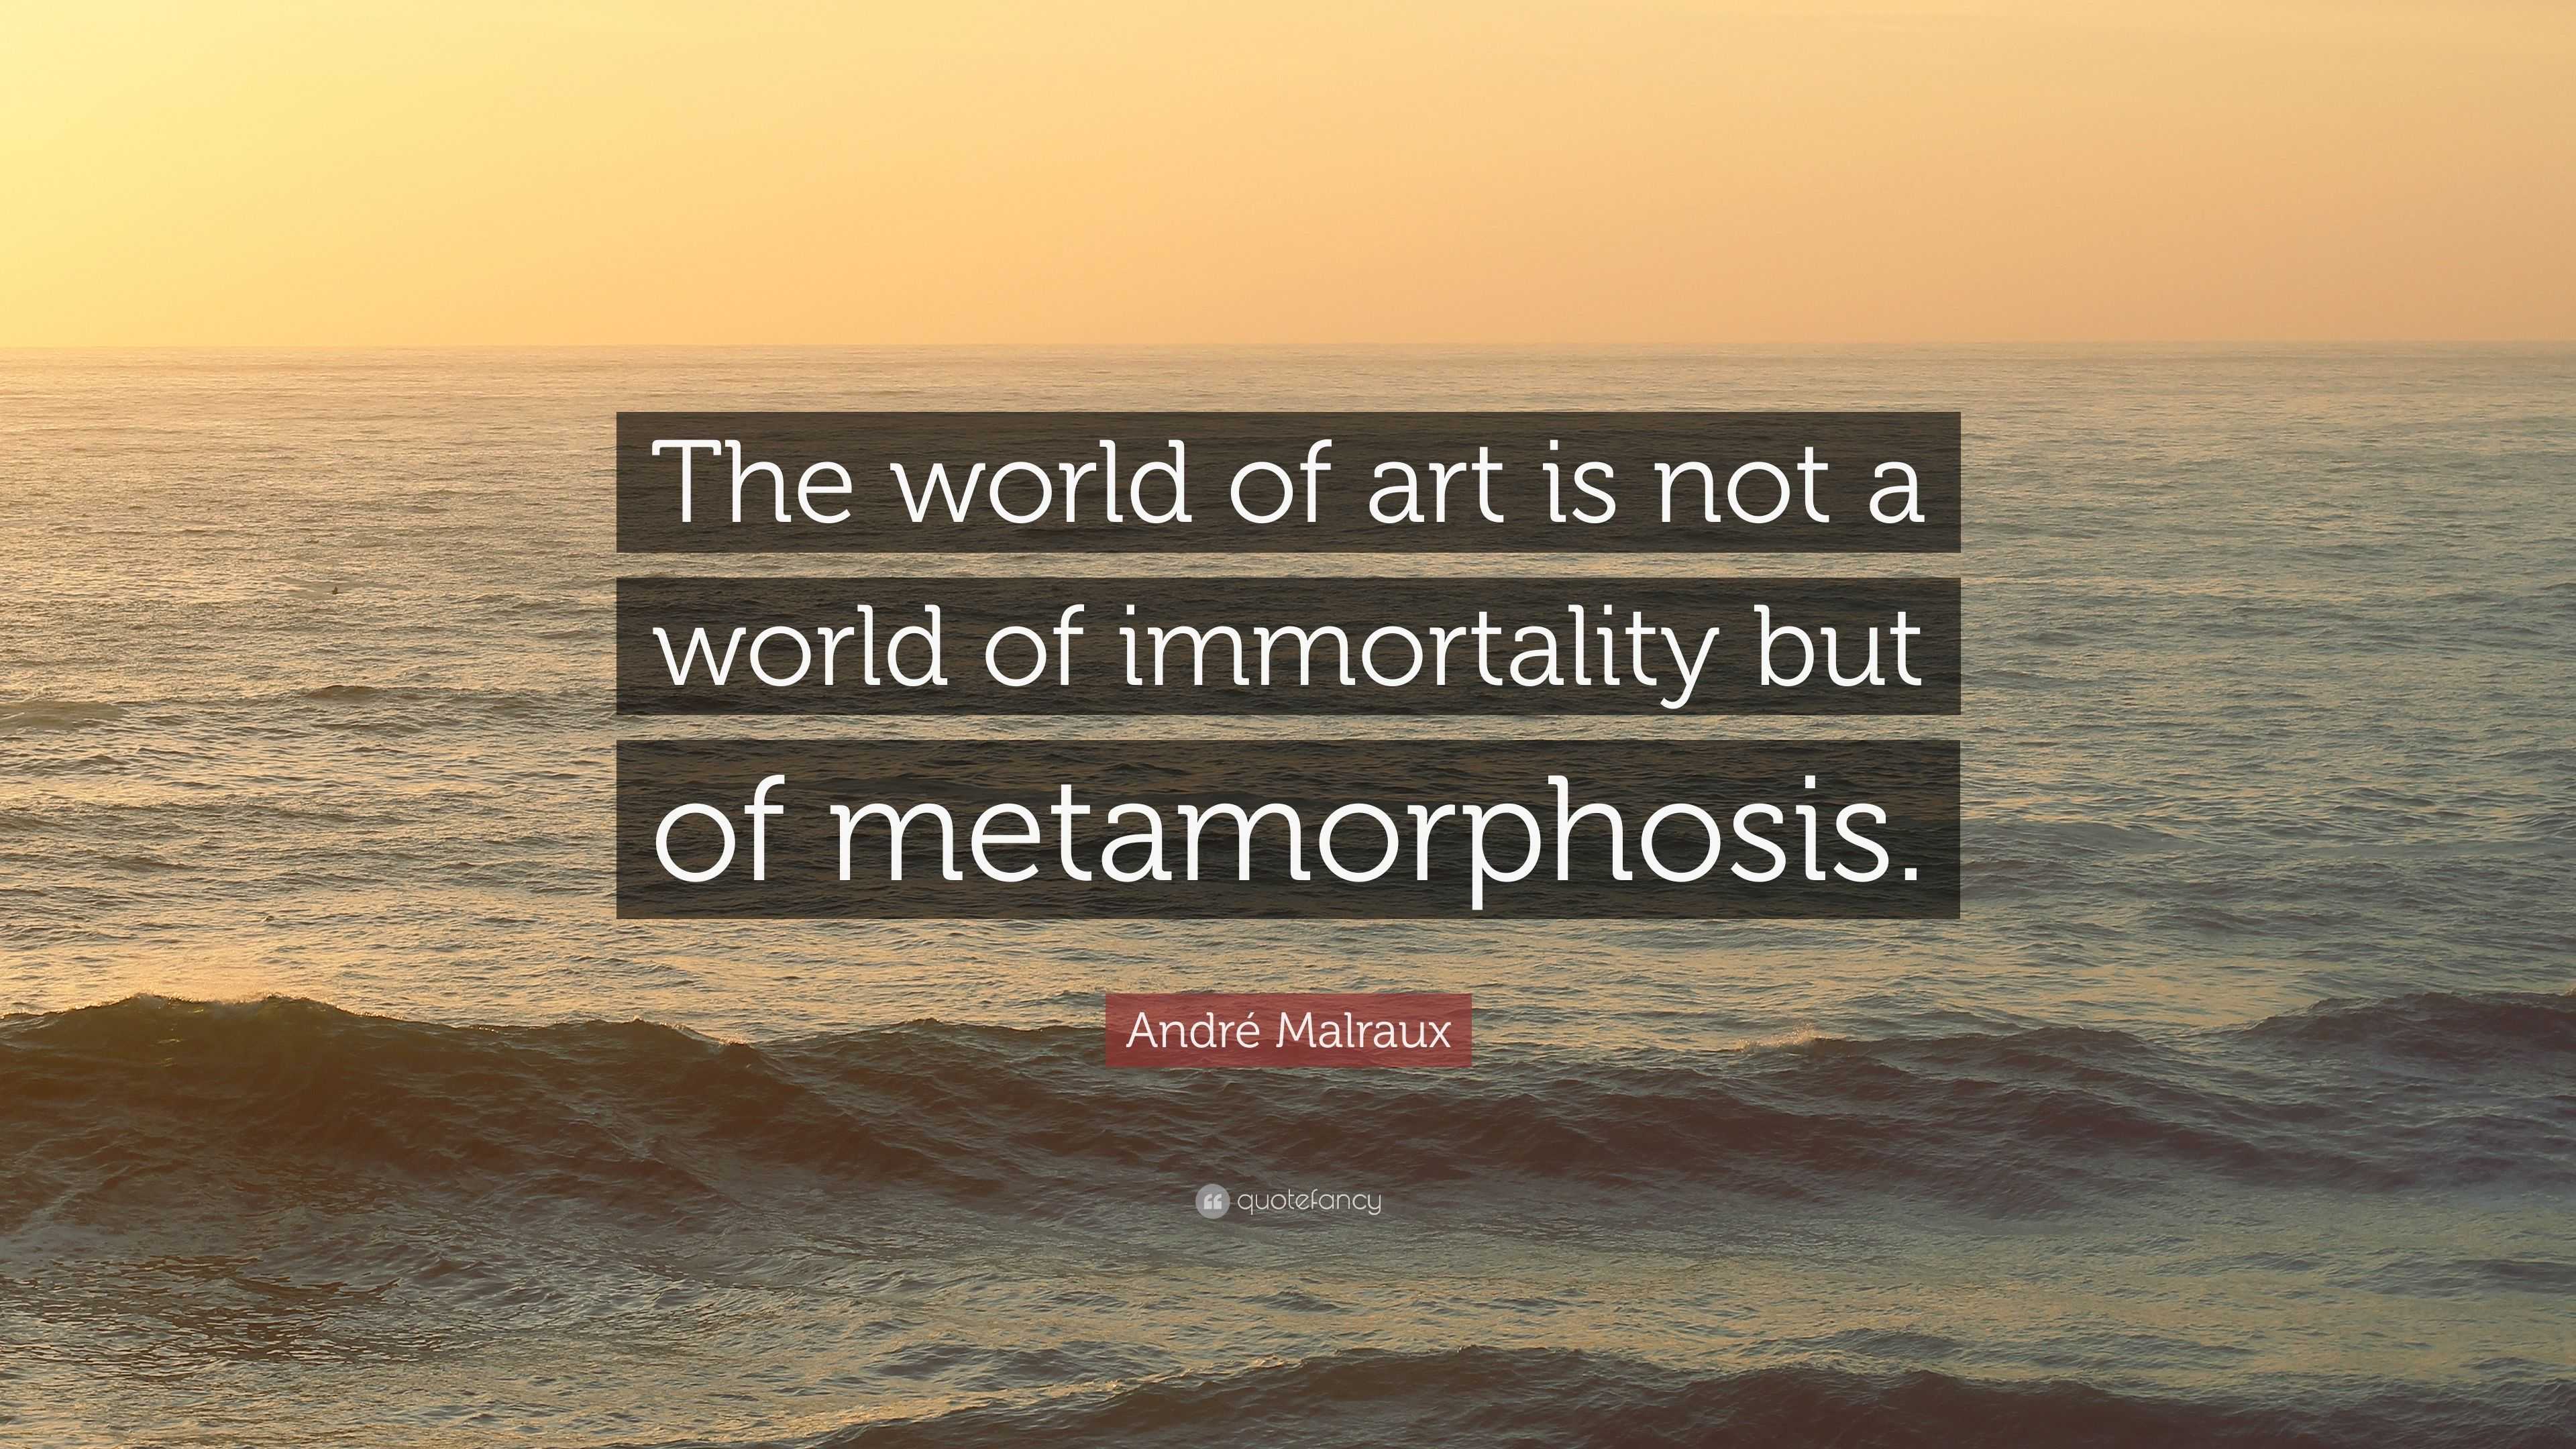 André Malraux Quote: “The world of art is not a world of immortality ...